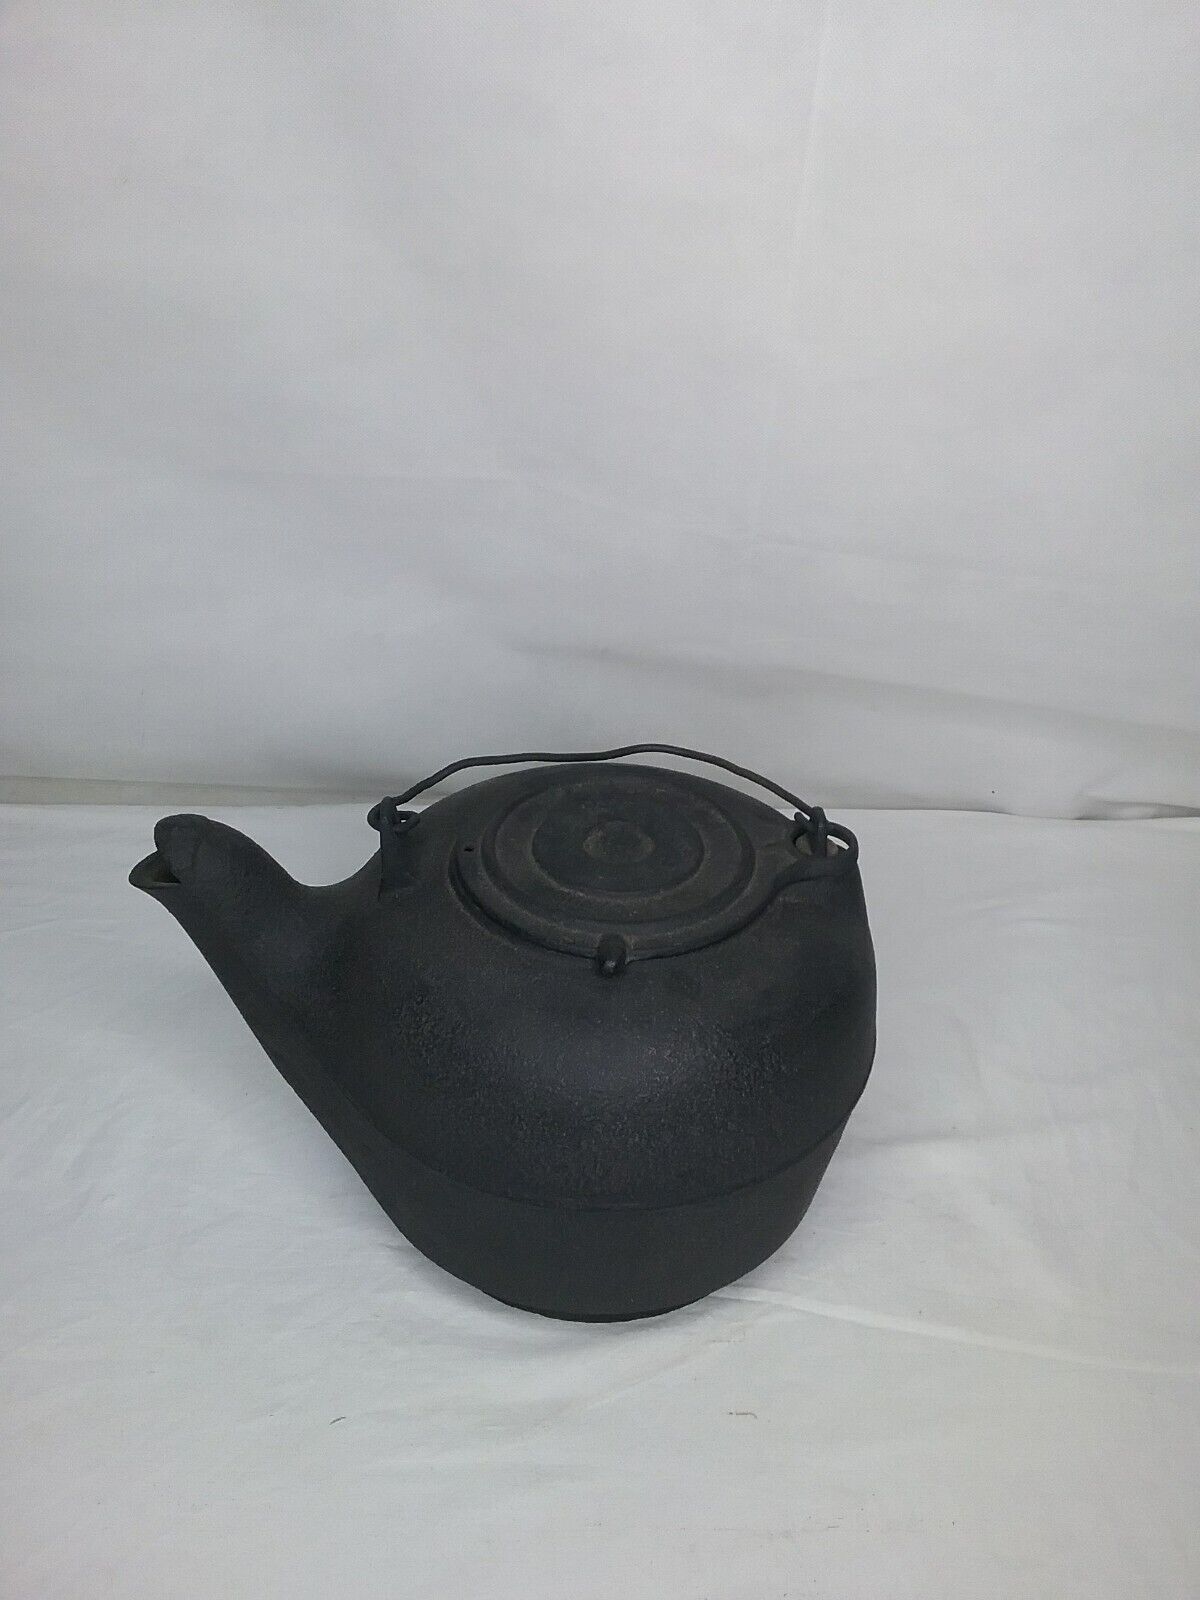 Antique Cast Iron Kettle Swivel Lid Marked Late 1800's Great Condition